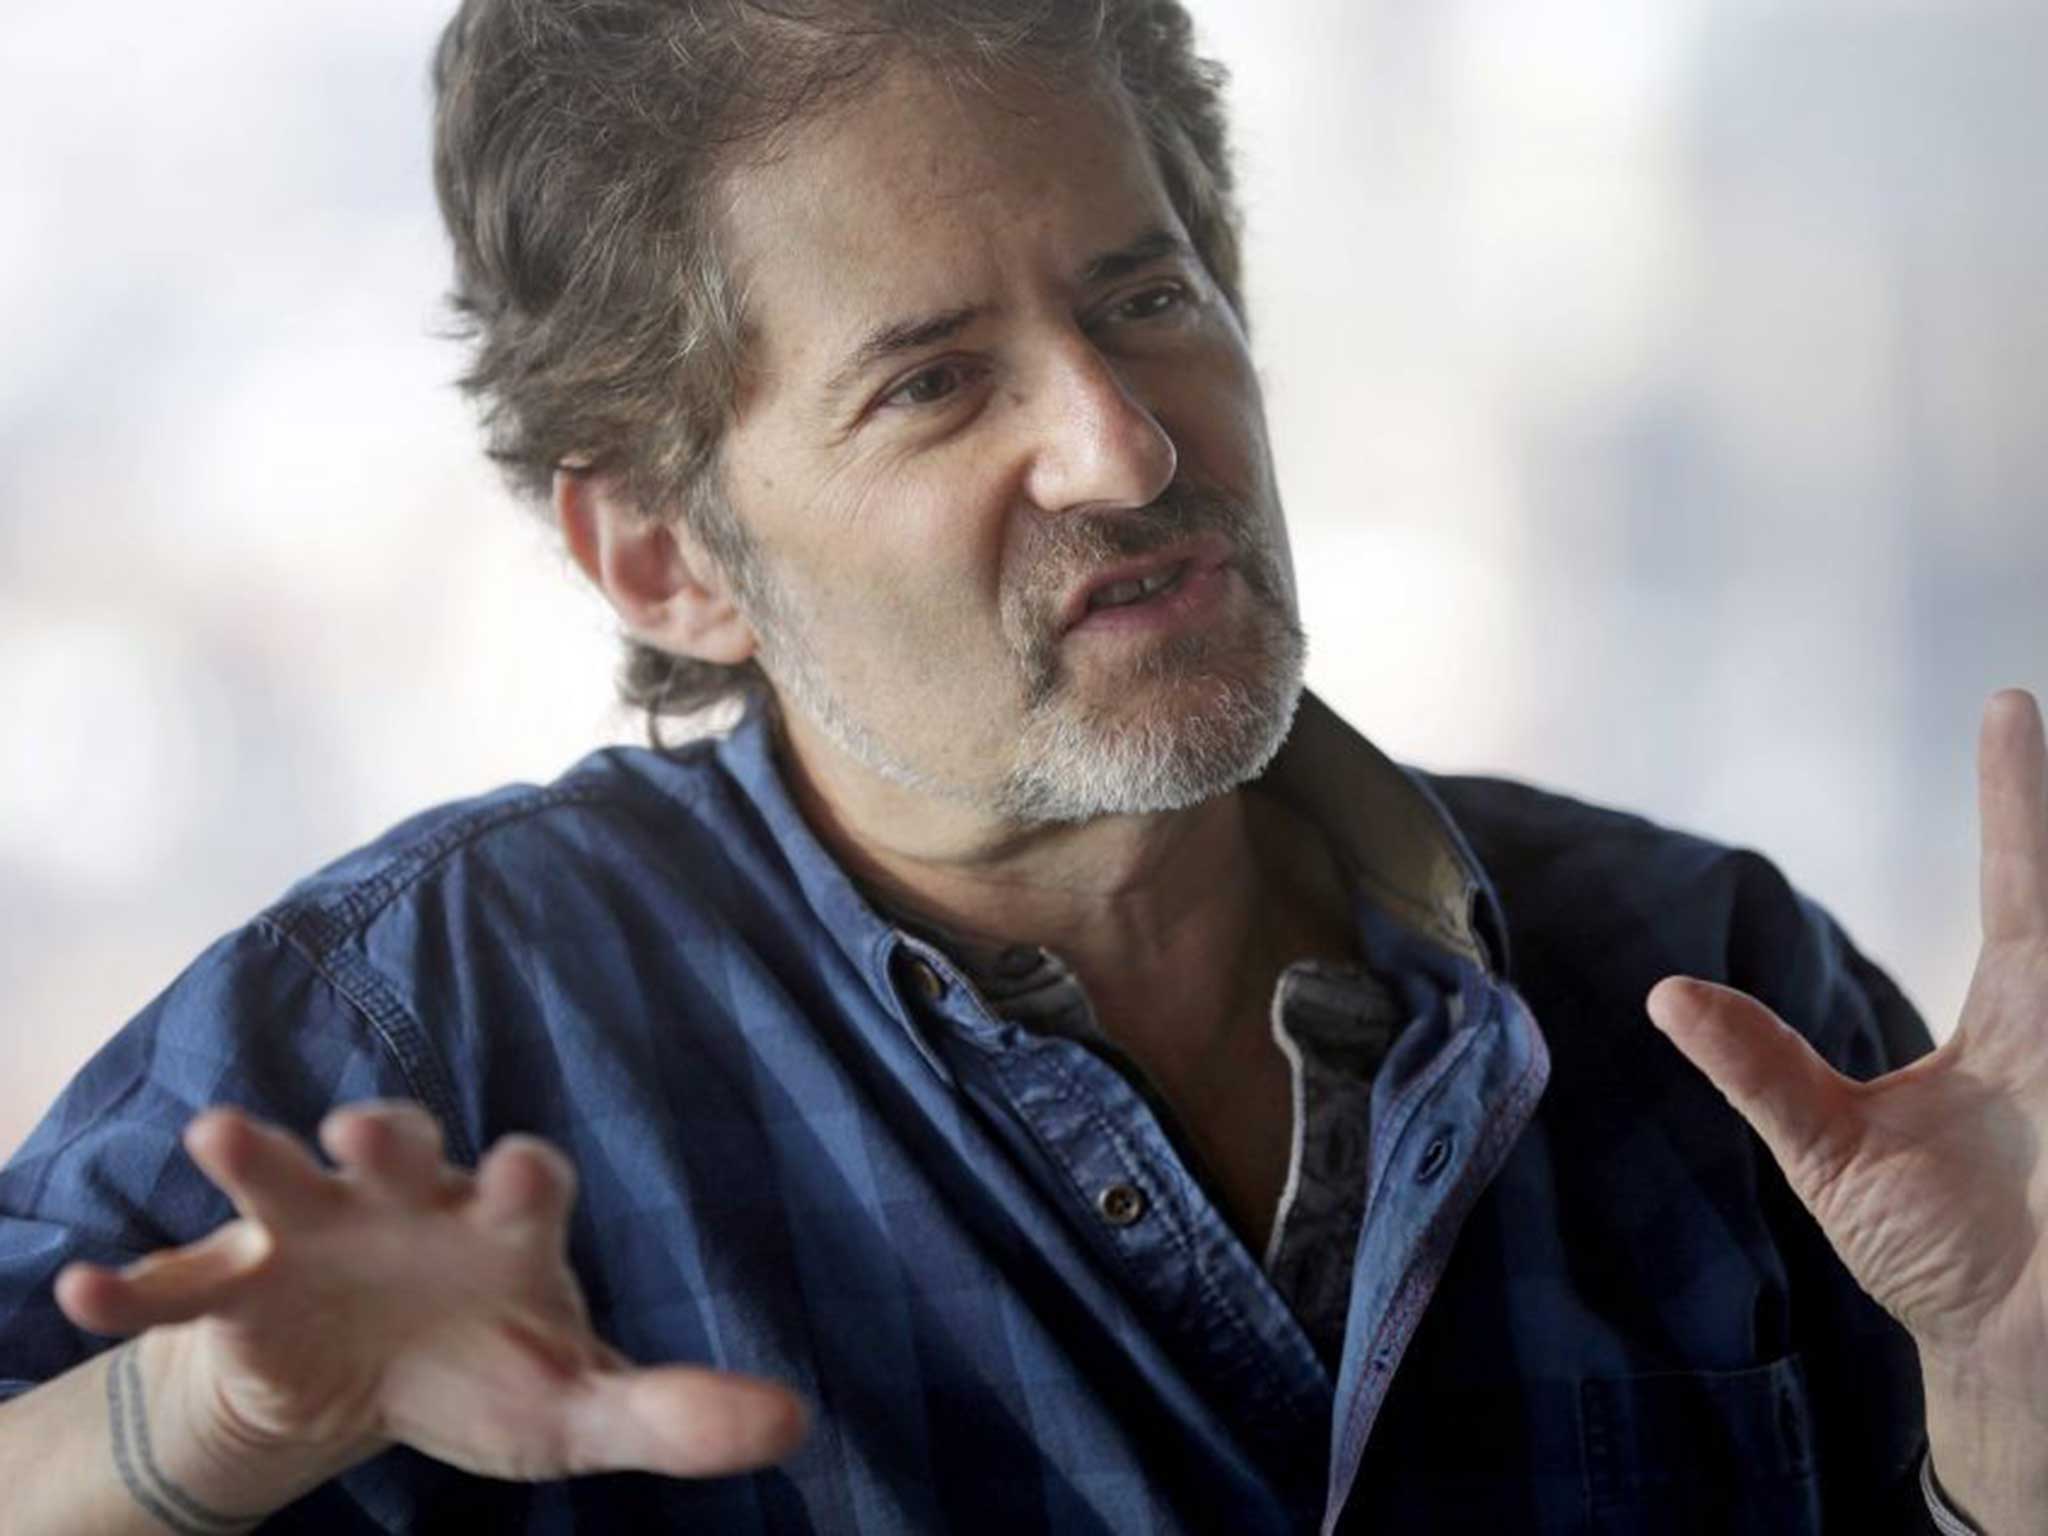 James Horner has died aged 61